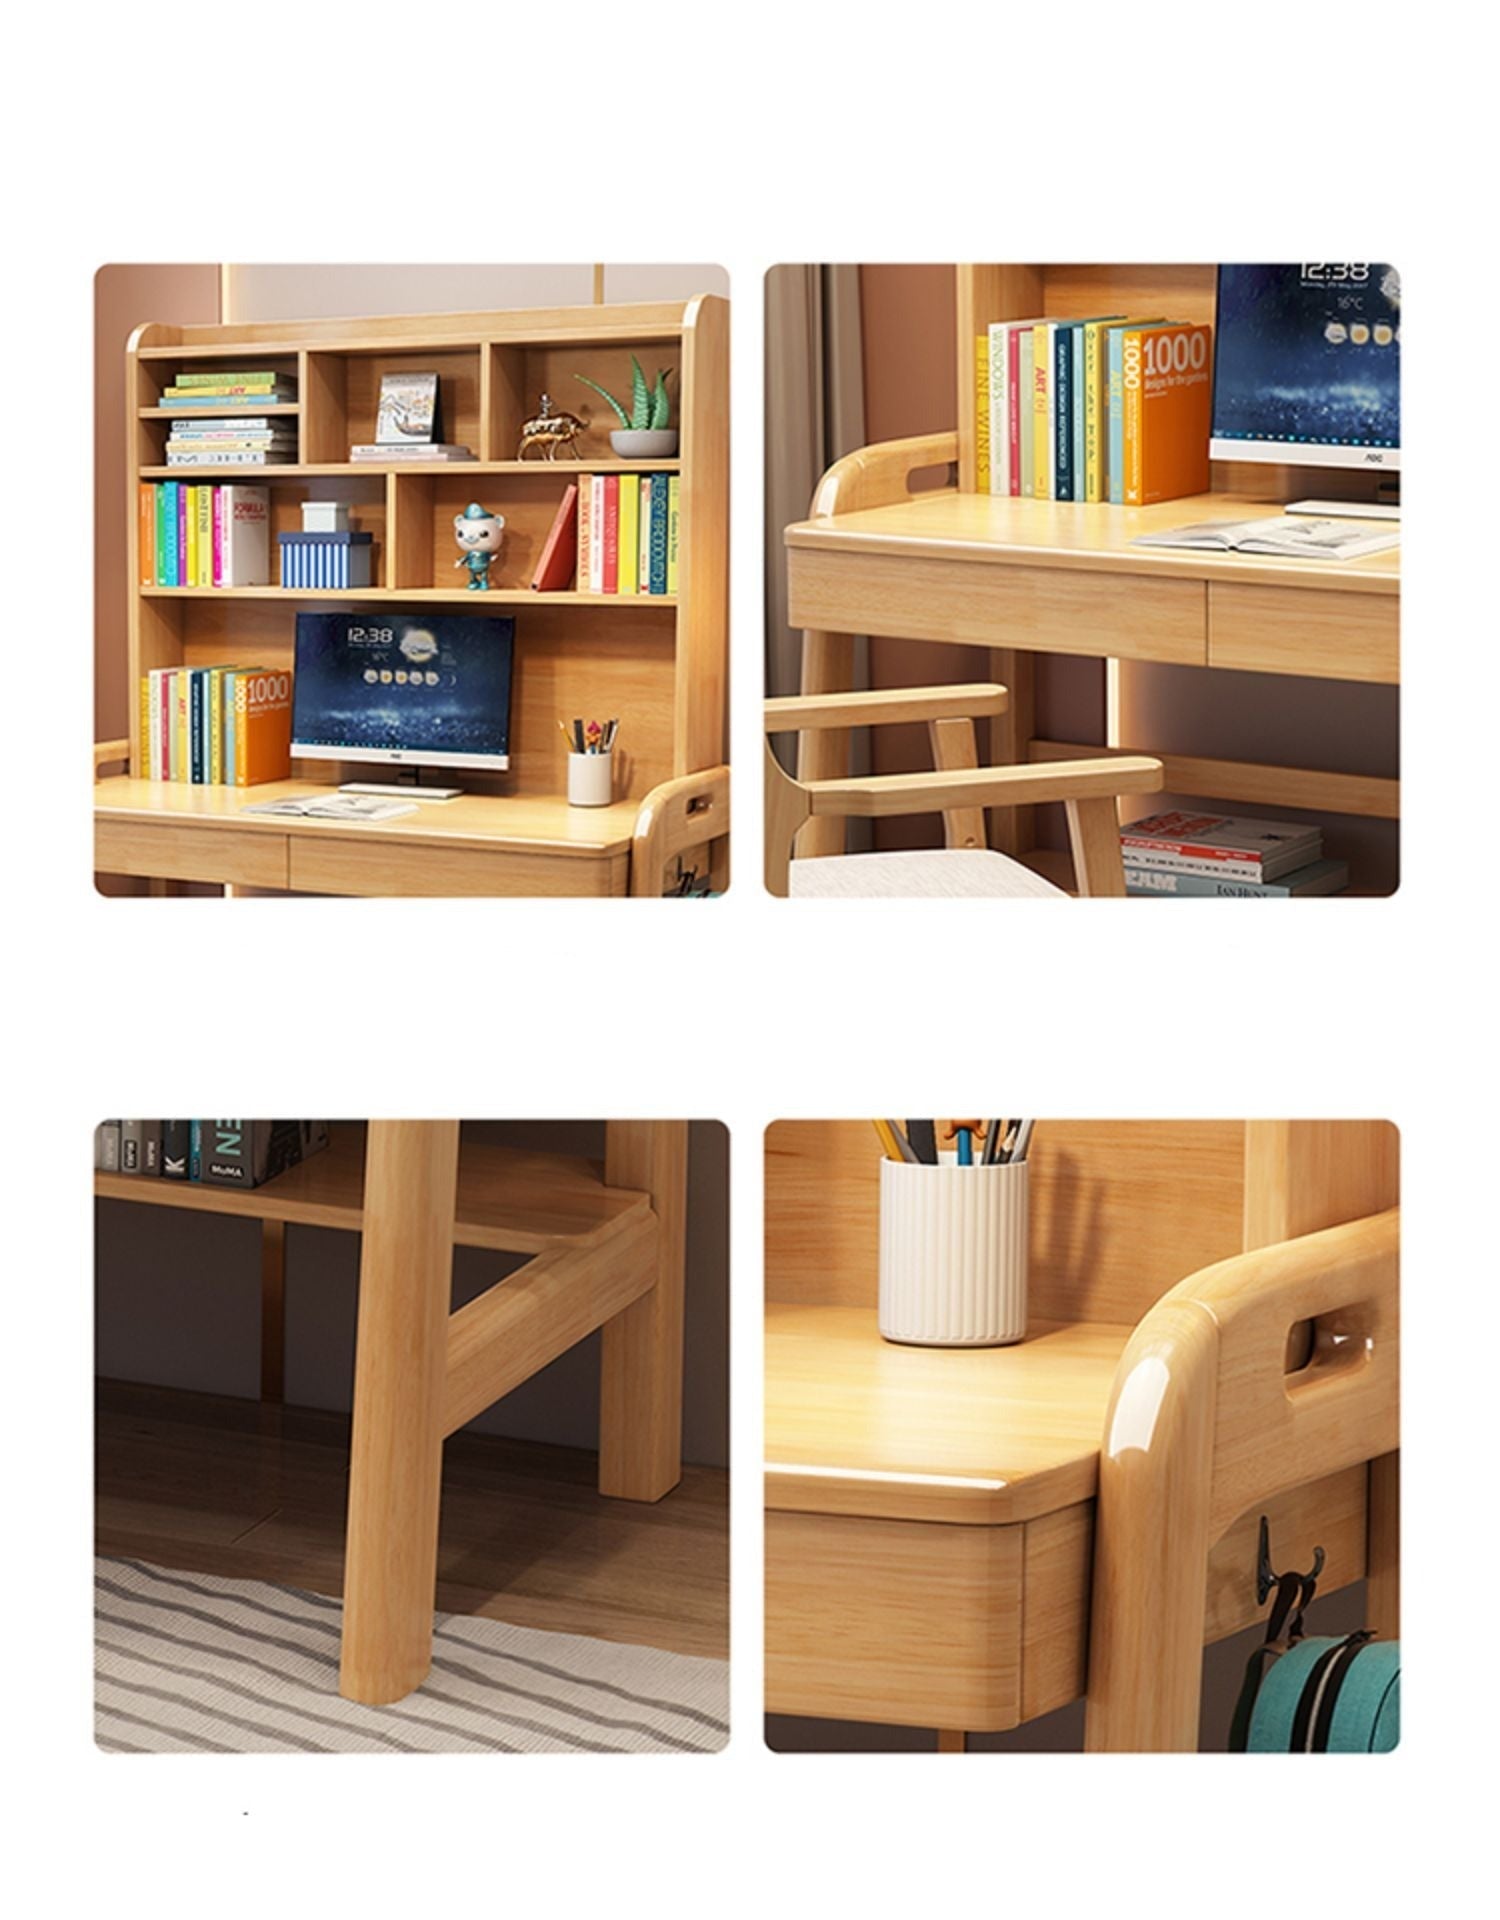 Solid Wood Study Desk with High Shelf and Drawers/Bookcase/Rubberwood/Natural wood color